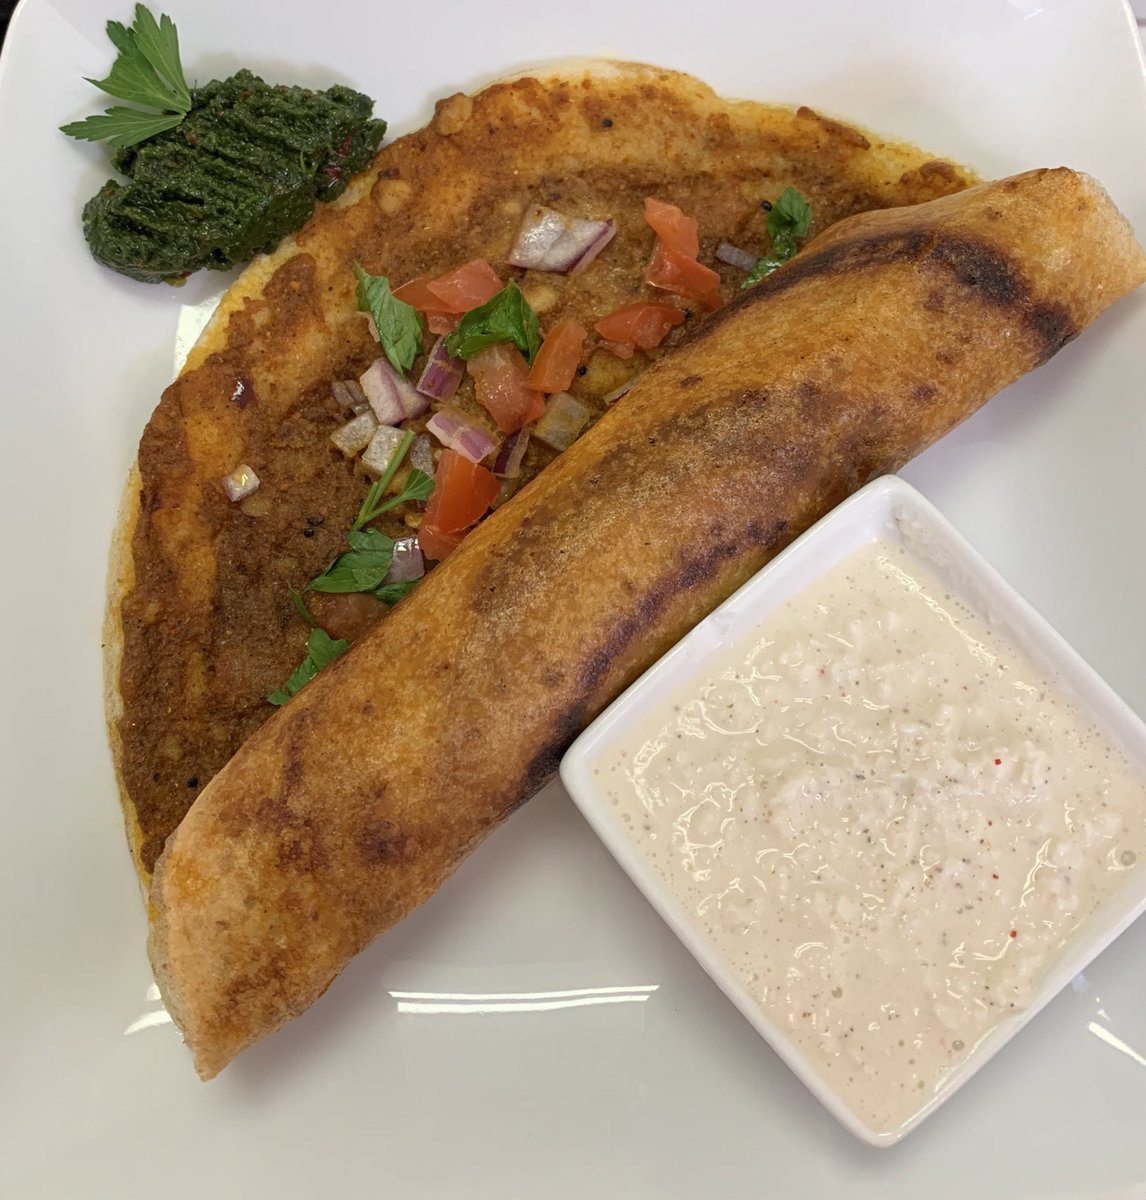 Dosa with desiccated coconut and parsley cilantro chutney